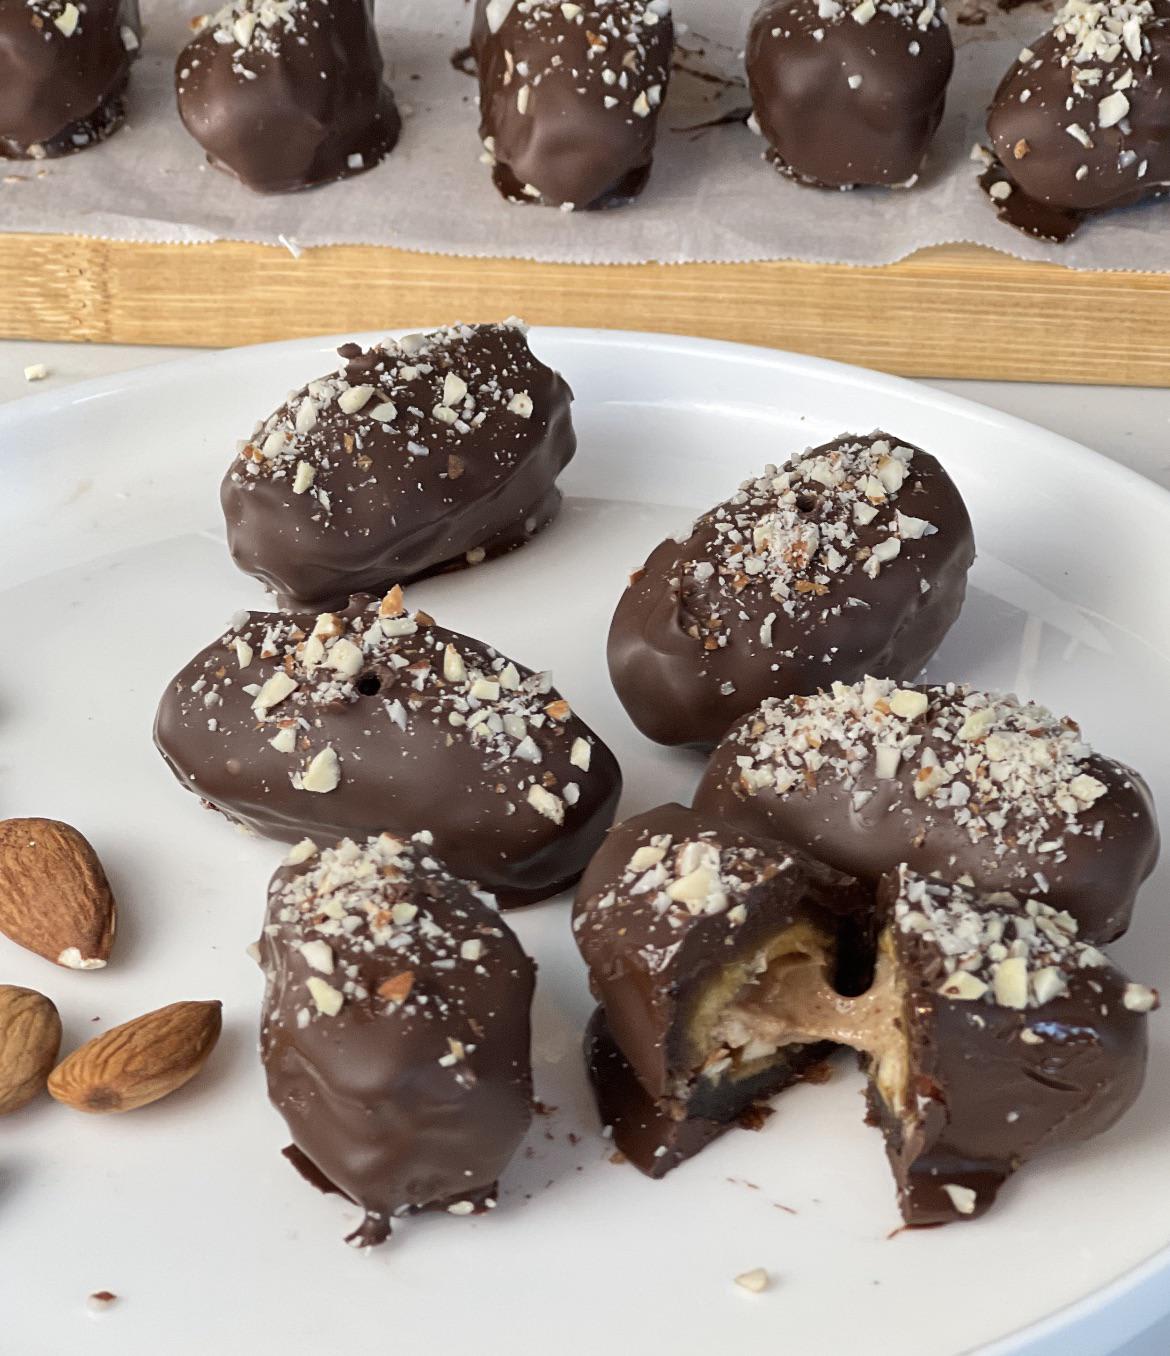 Chocolate coated dates filled with fresh almond butter. Happy Ramadan